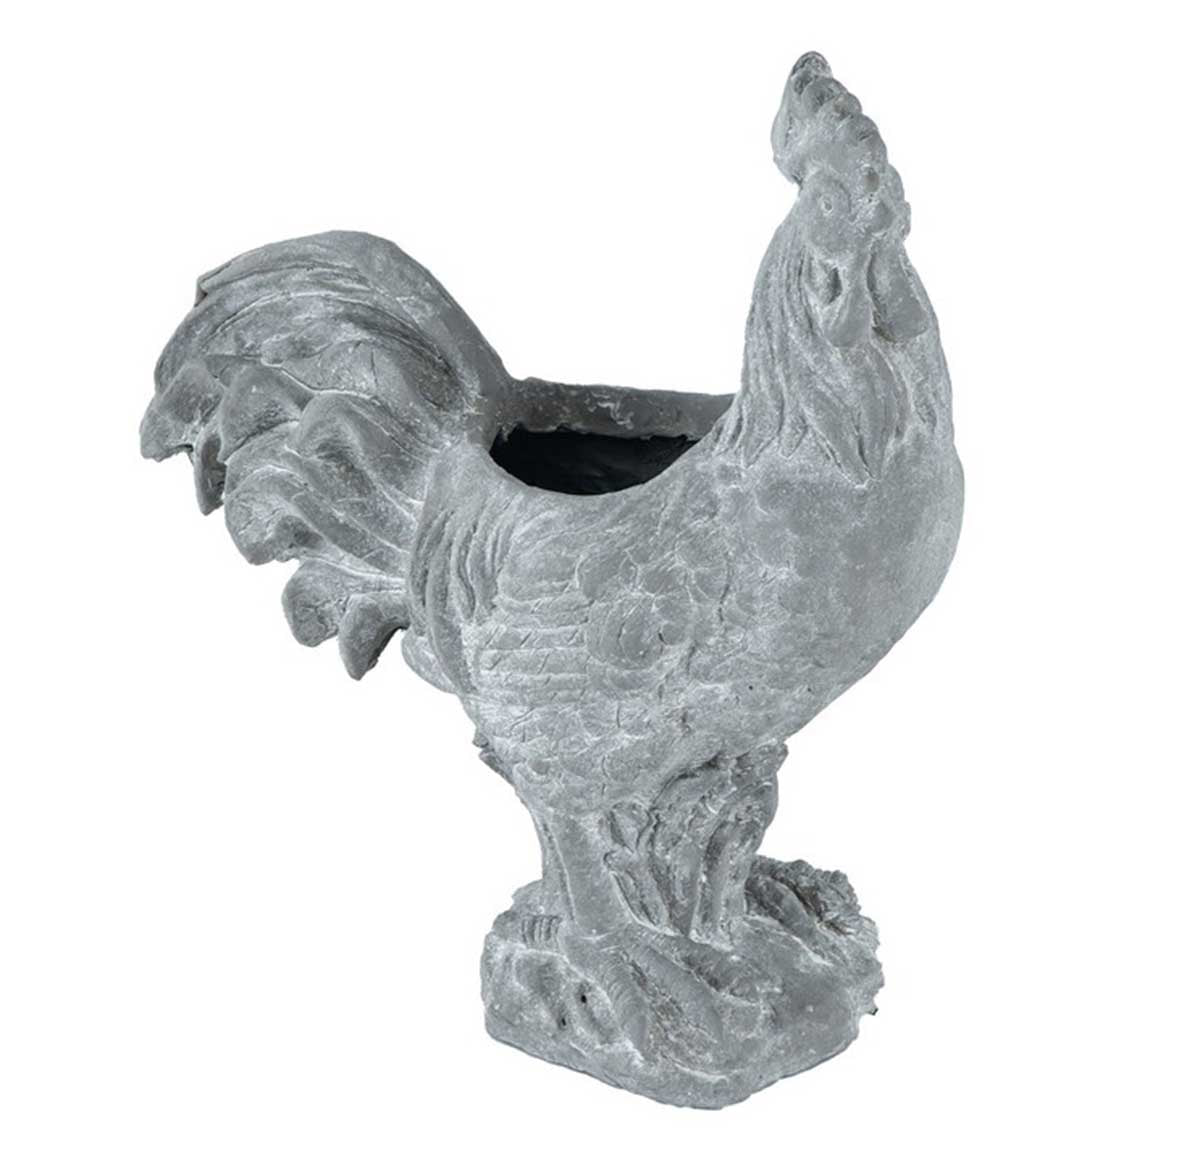 Rooster Planter - Resin | Pots & Planters | Home Decor